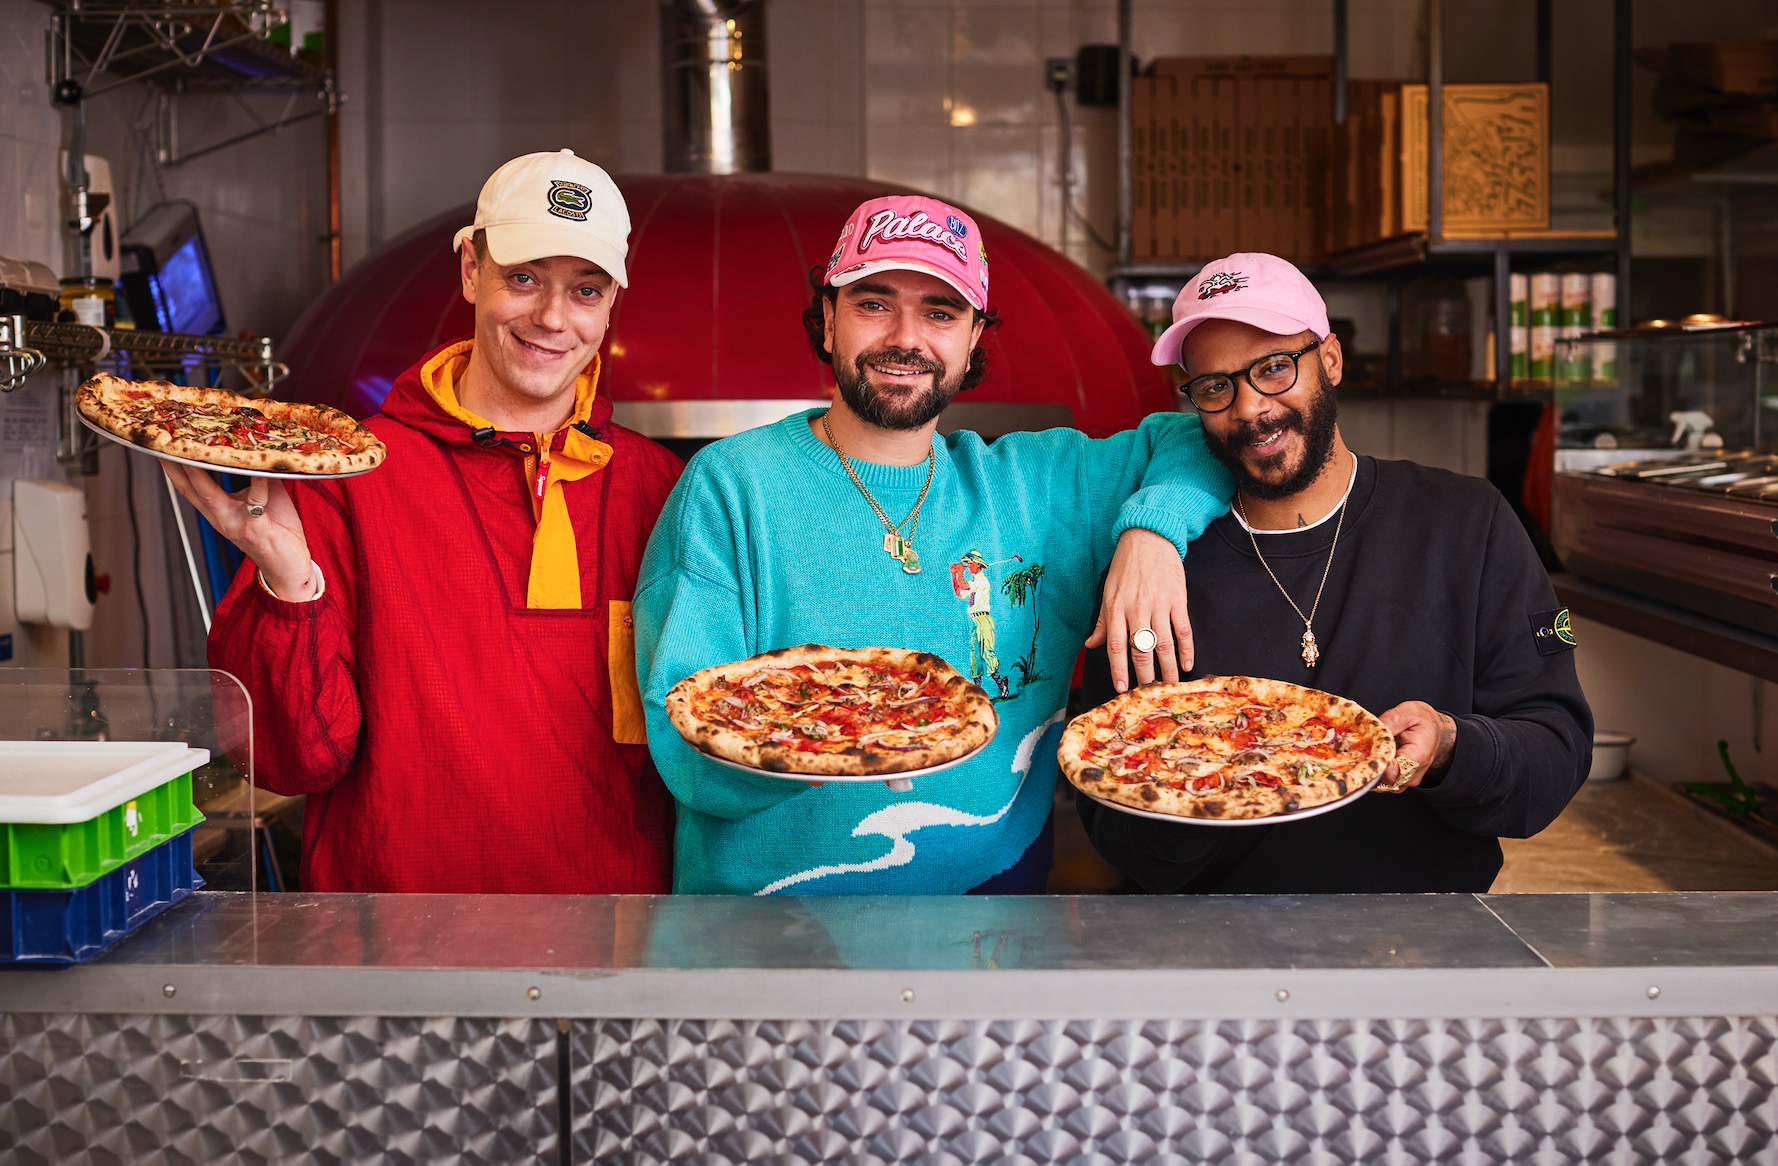 mc-grindah’s-taste-cadets-and-yard-sale-have-done-a-collab-charity-pizza